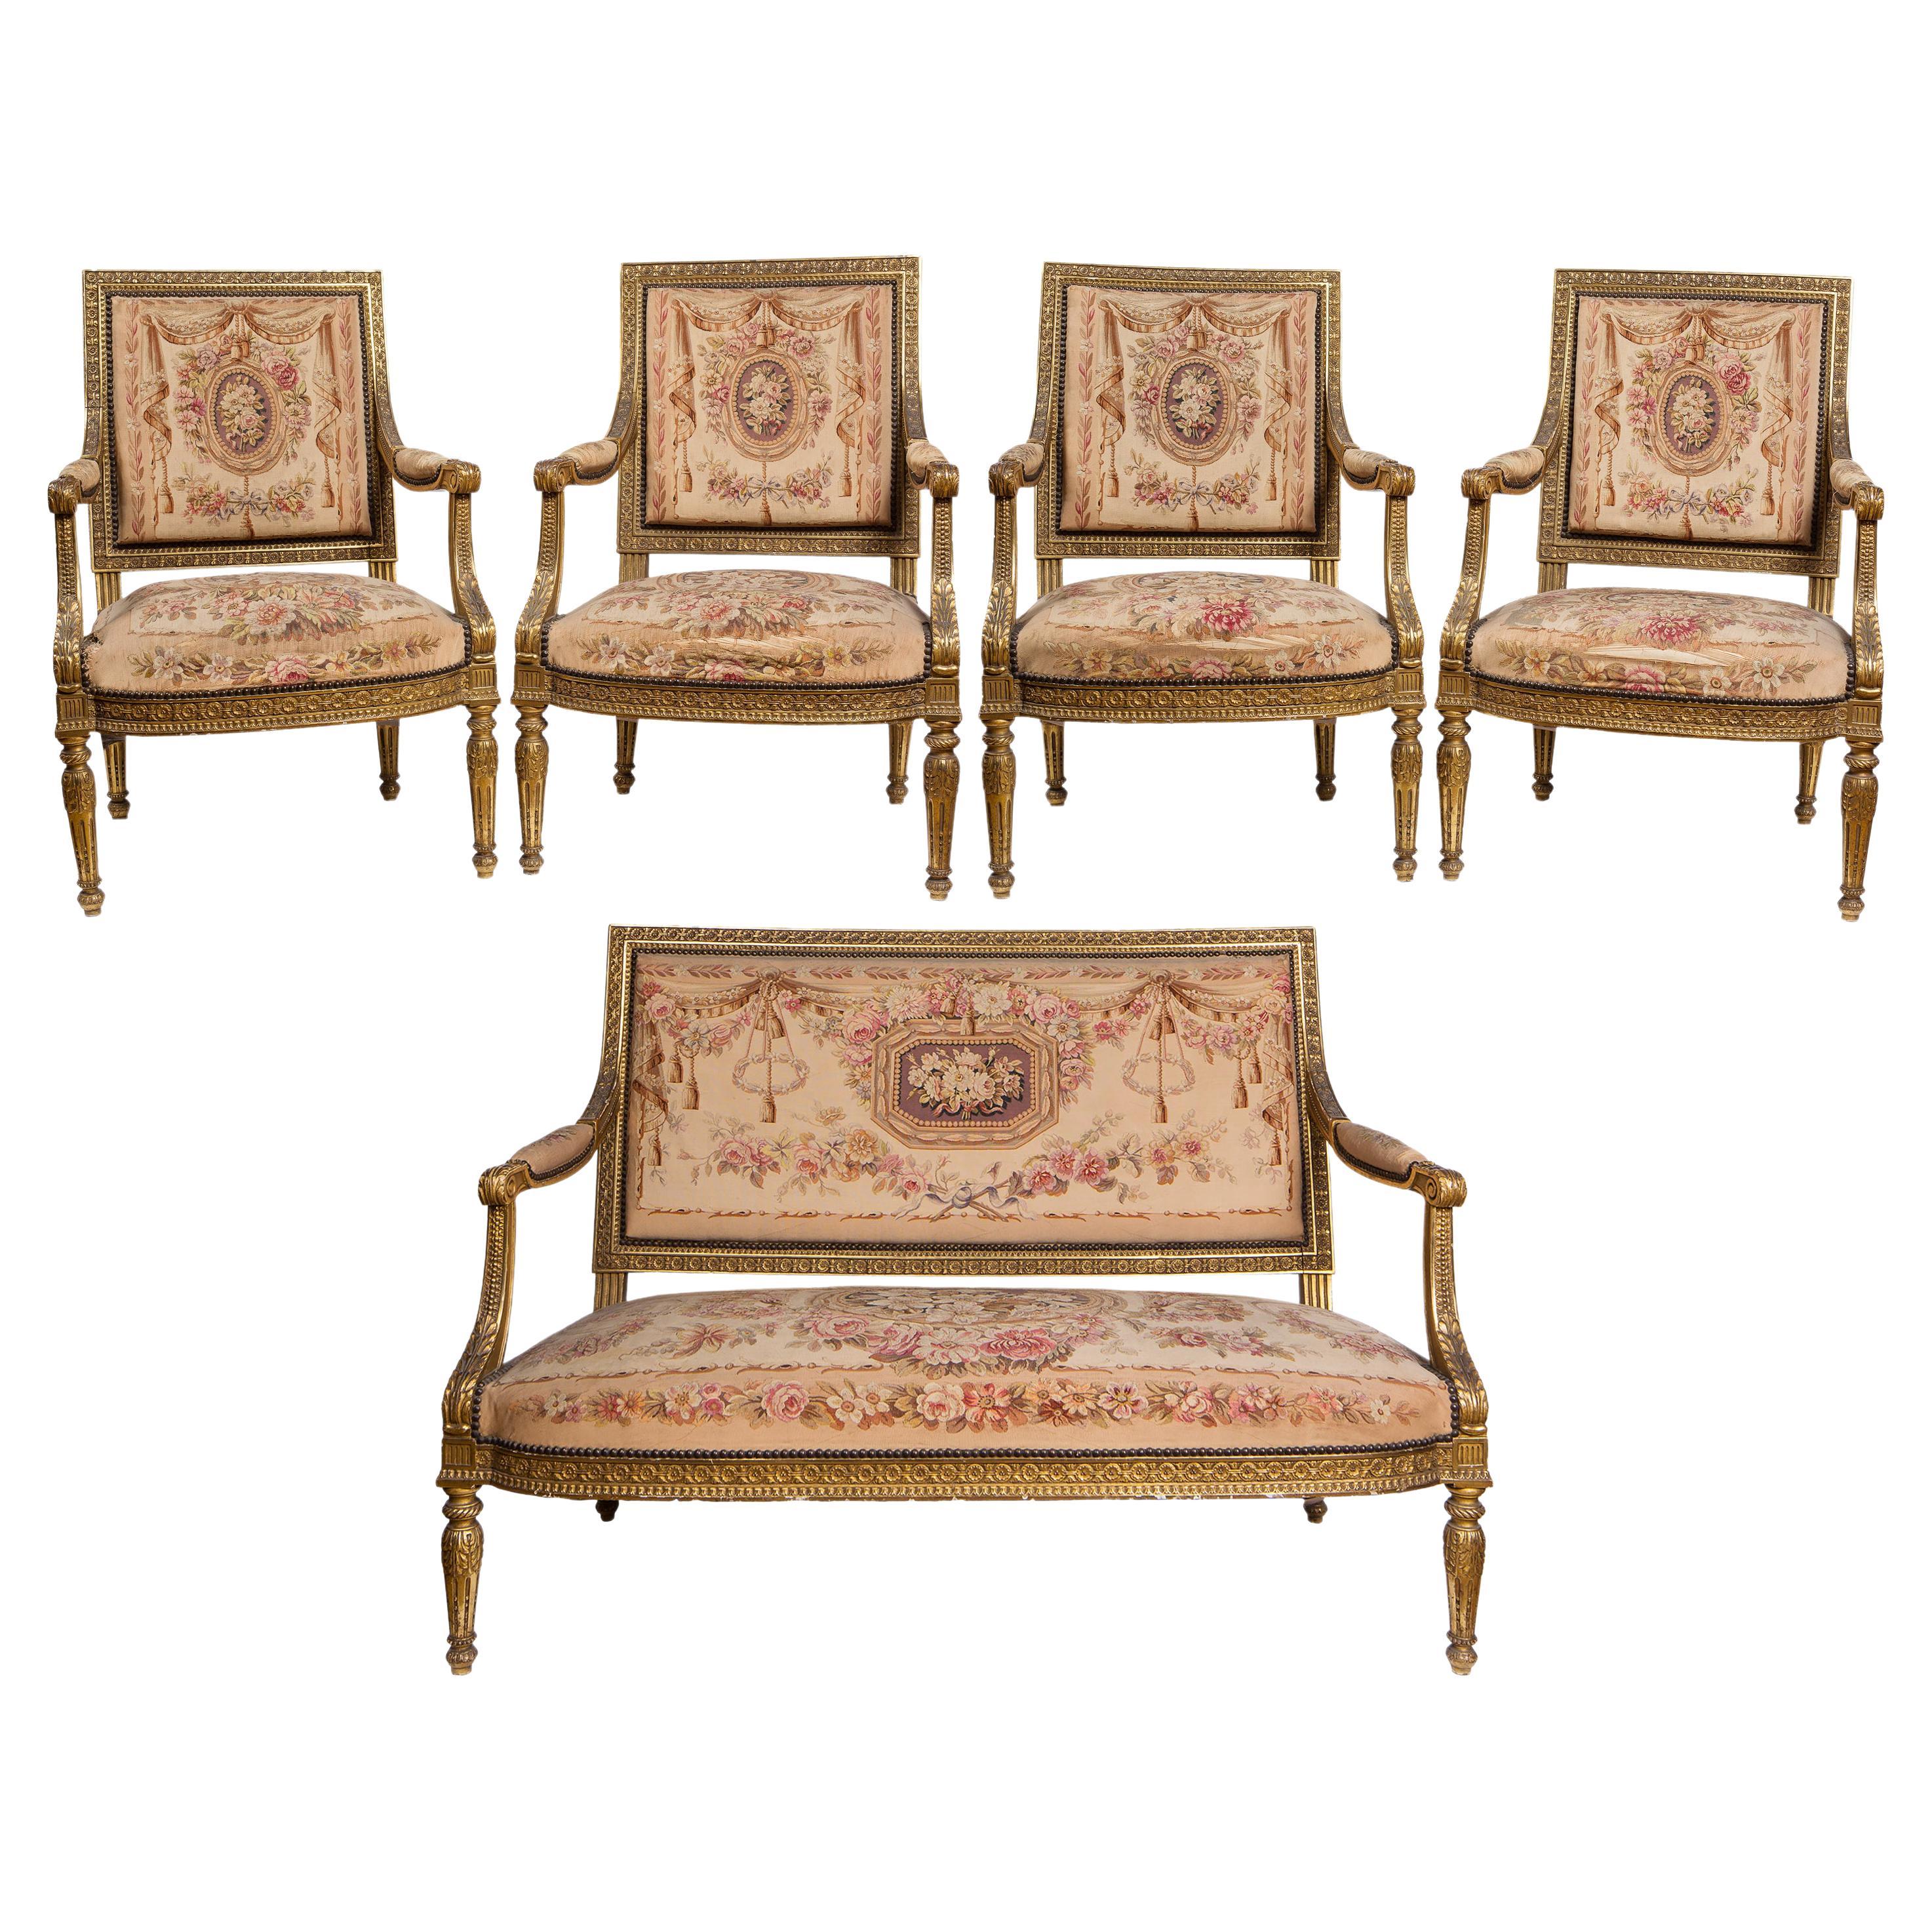 Antique Louis XVI Style Sofa, 4 Chair Salon Suite, Aubusson Tapestry Upholstery